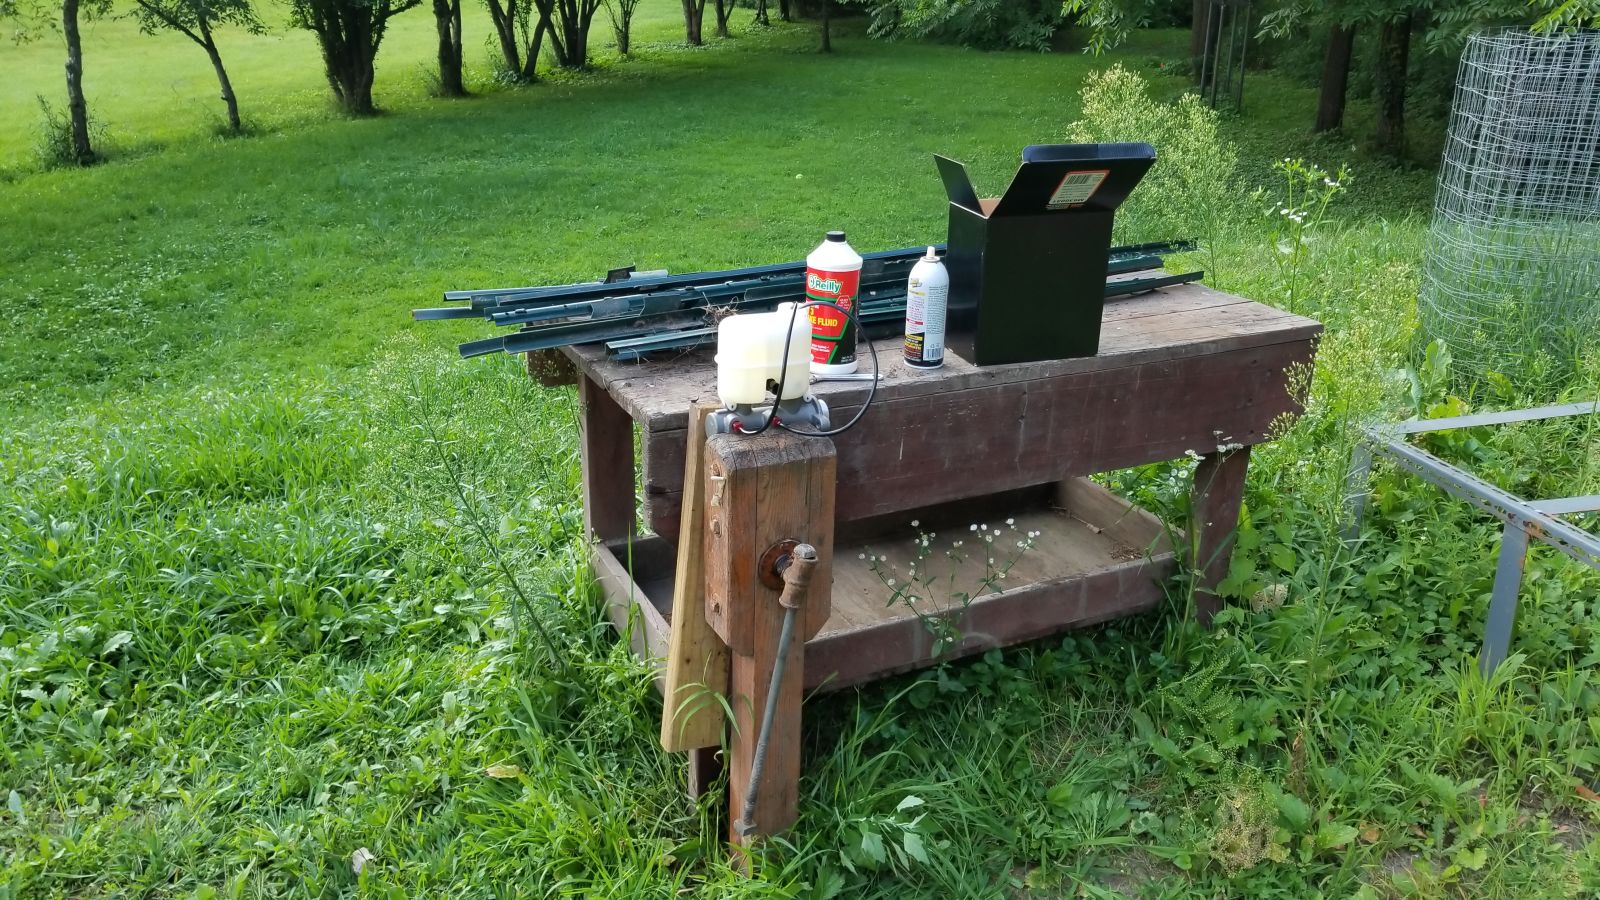 Bench bleeding in the great outdoors. I really need to finish cleaning my garage.